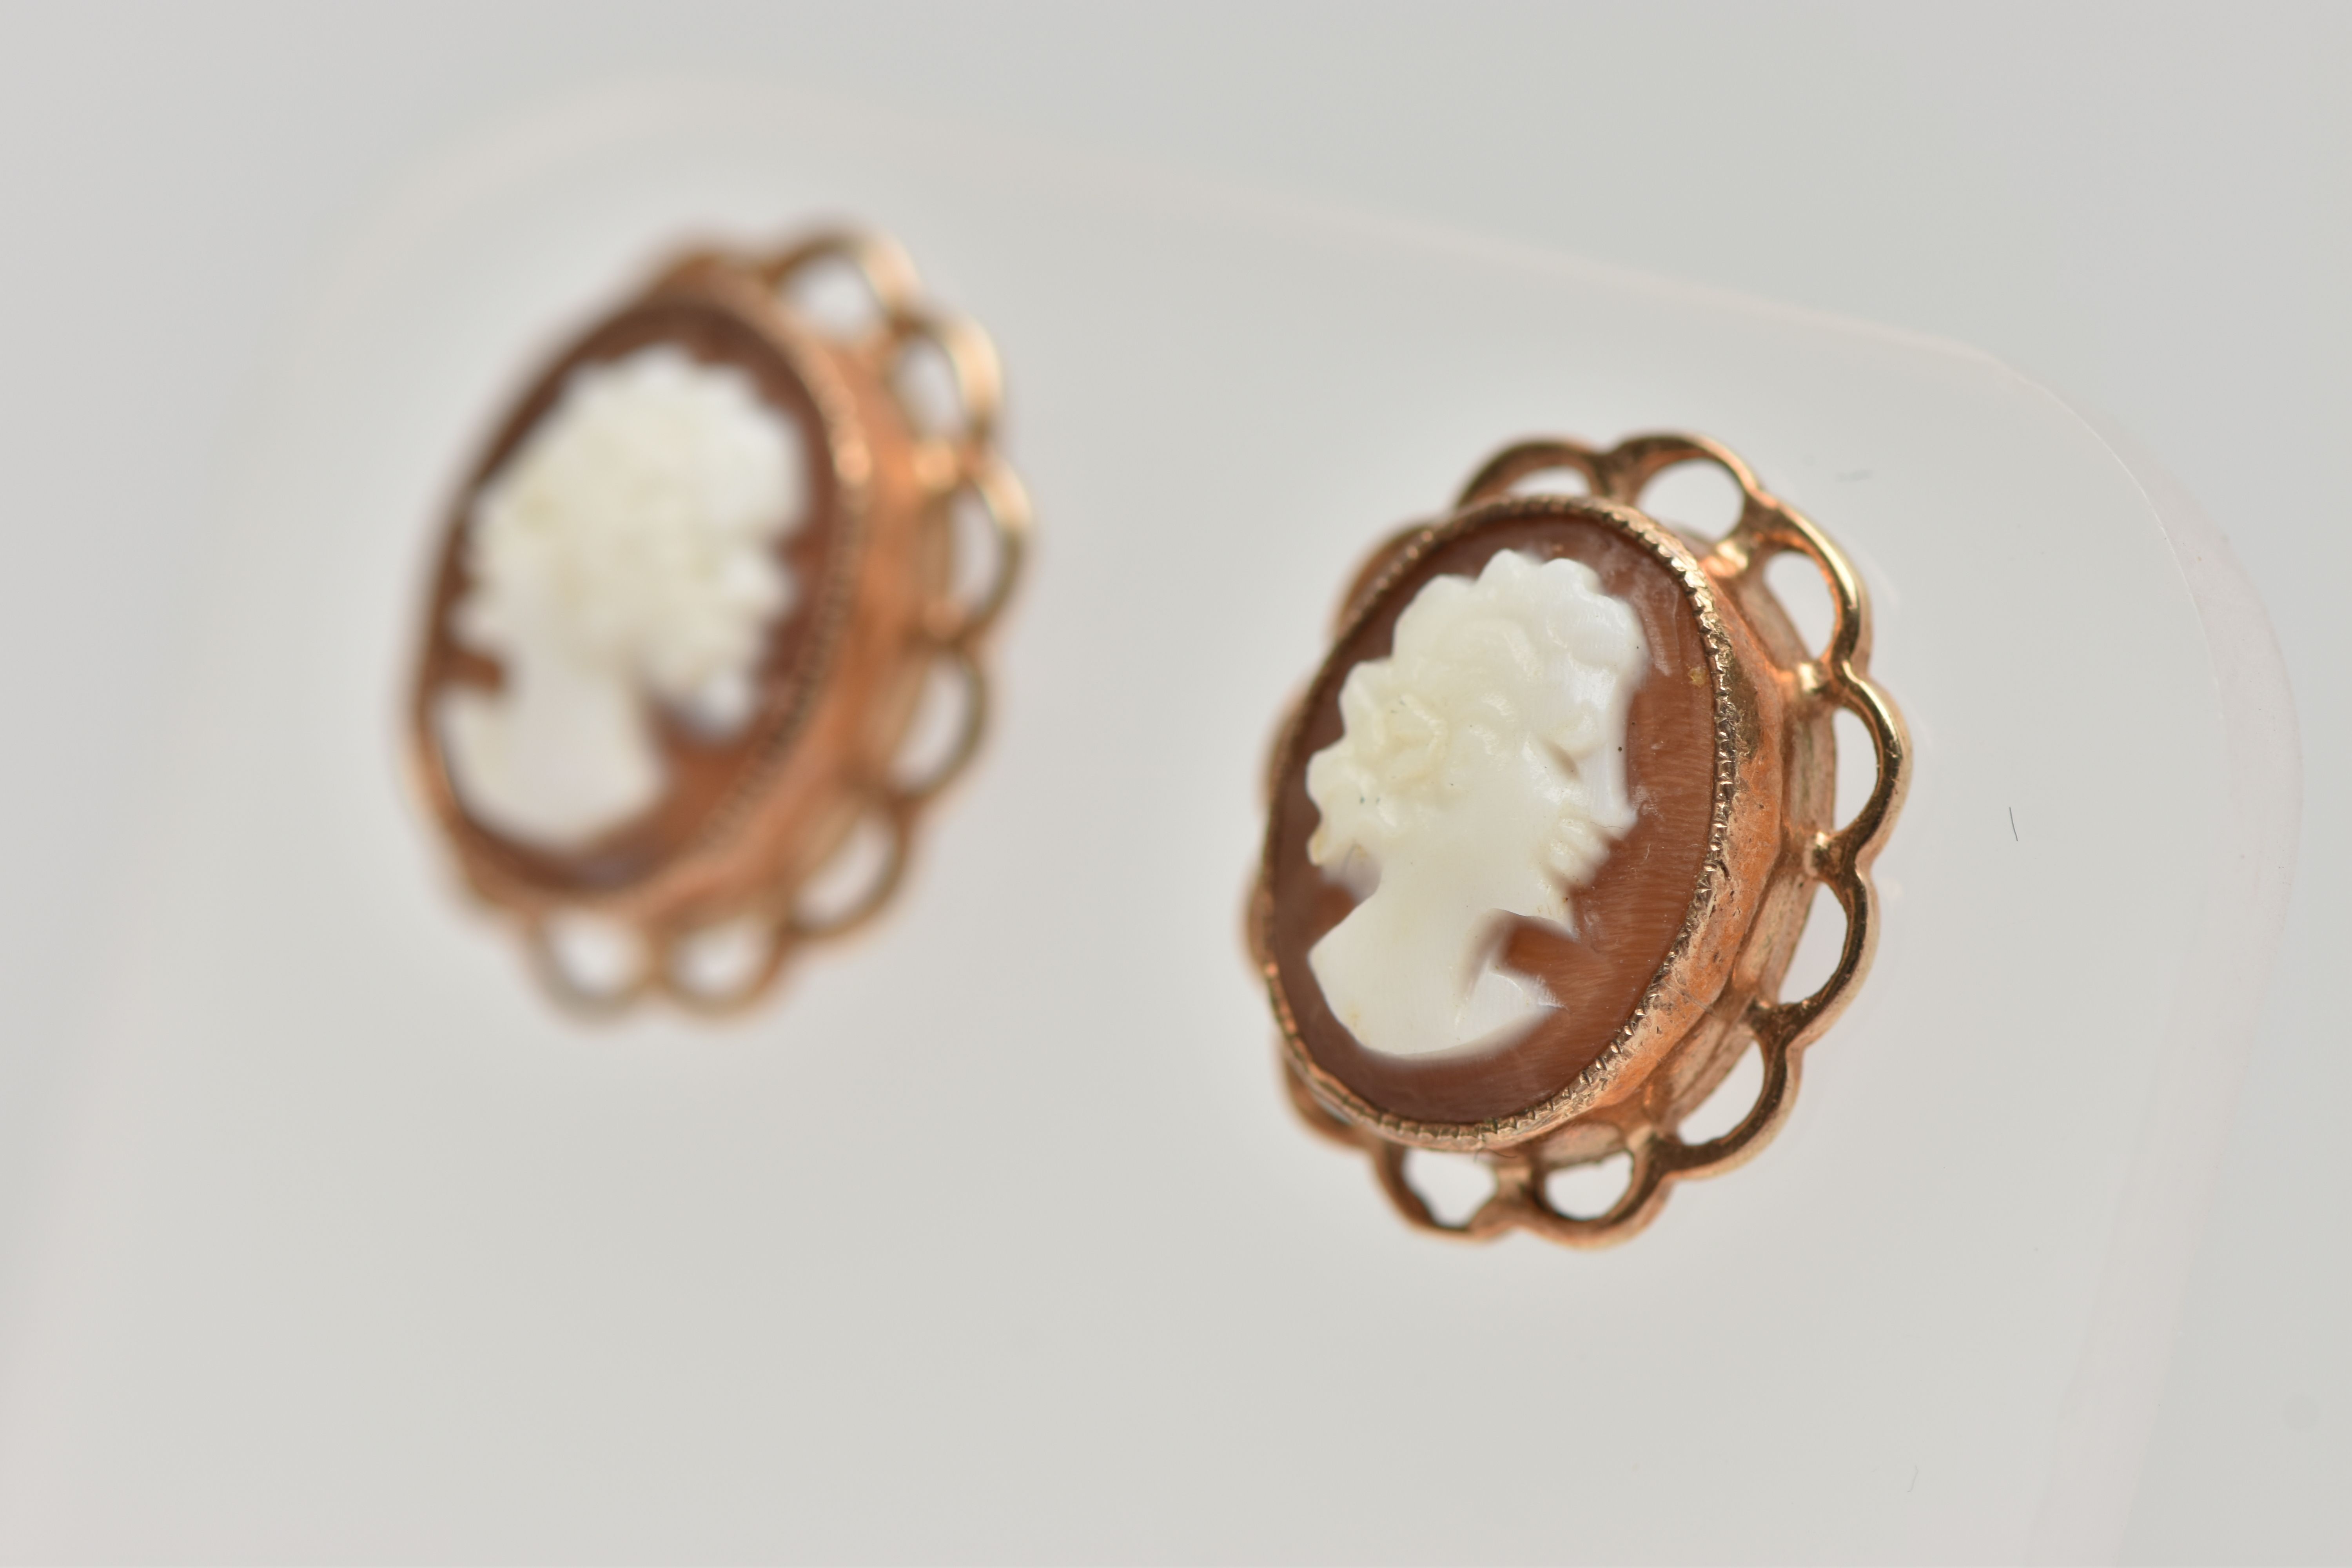 A PAIR OF 9CT GOLD CAMEO STUD EARRINGS, each of an oval form with carved shell cameo depicting a - Image 3 of 4